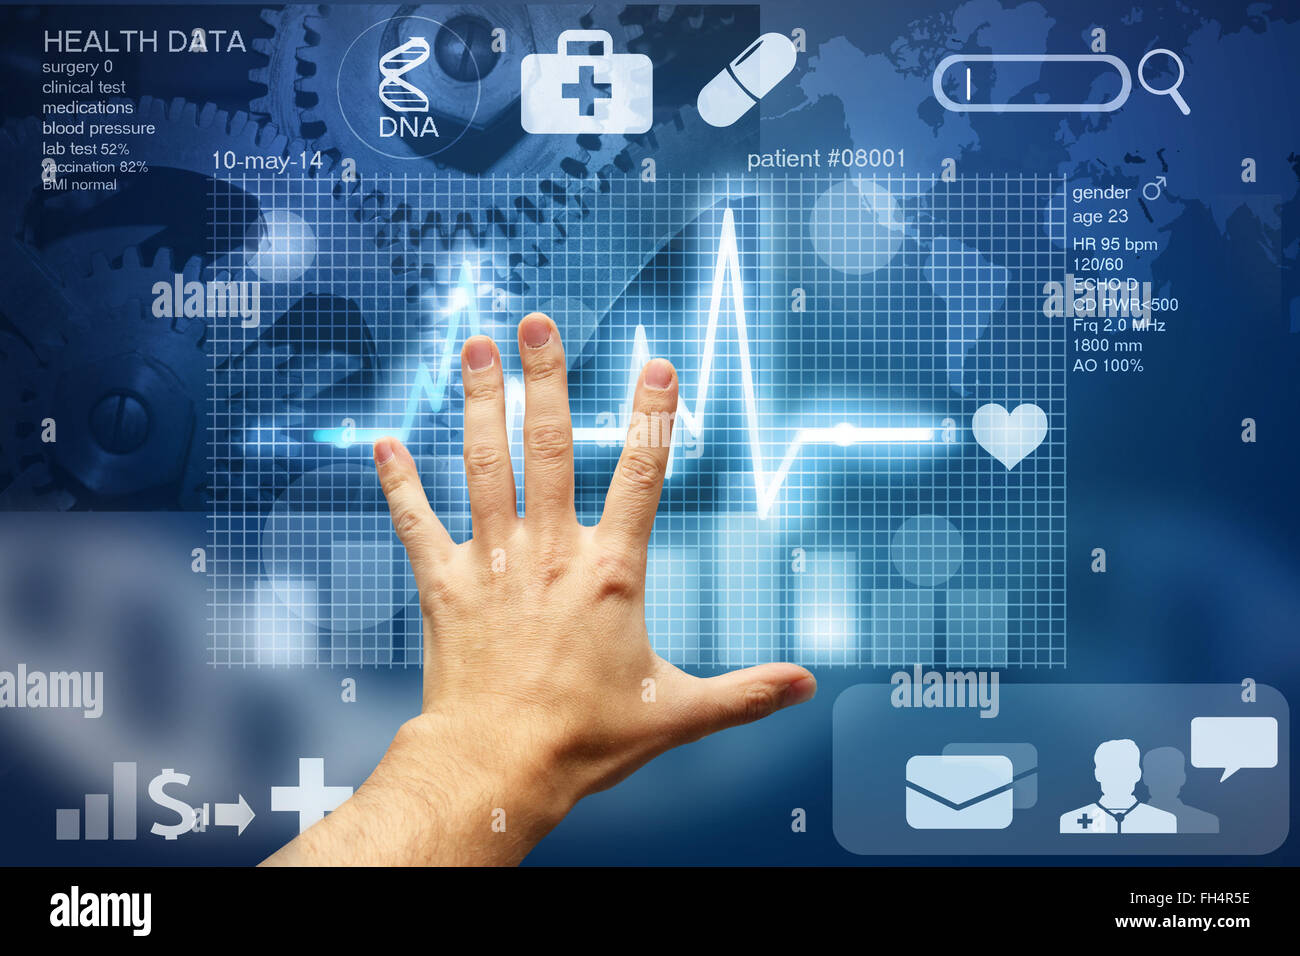 hand touching screen with medical data Stock Photo